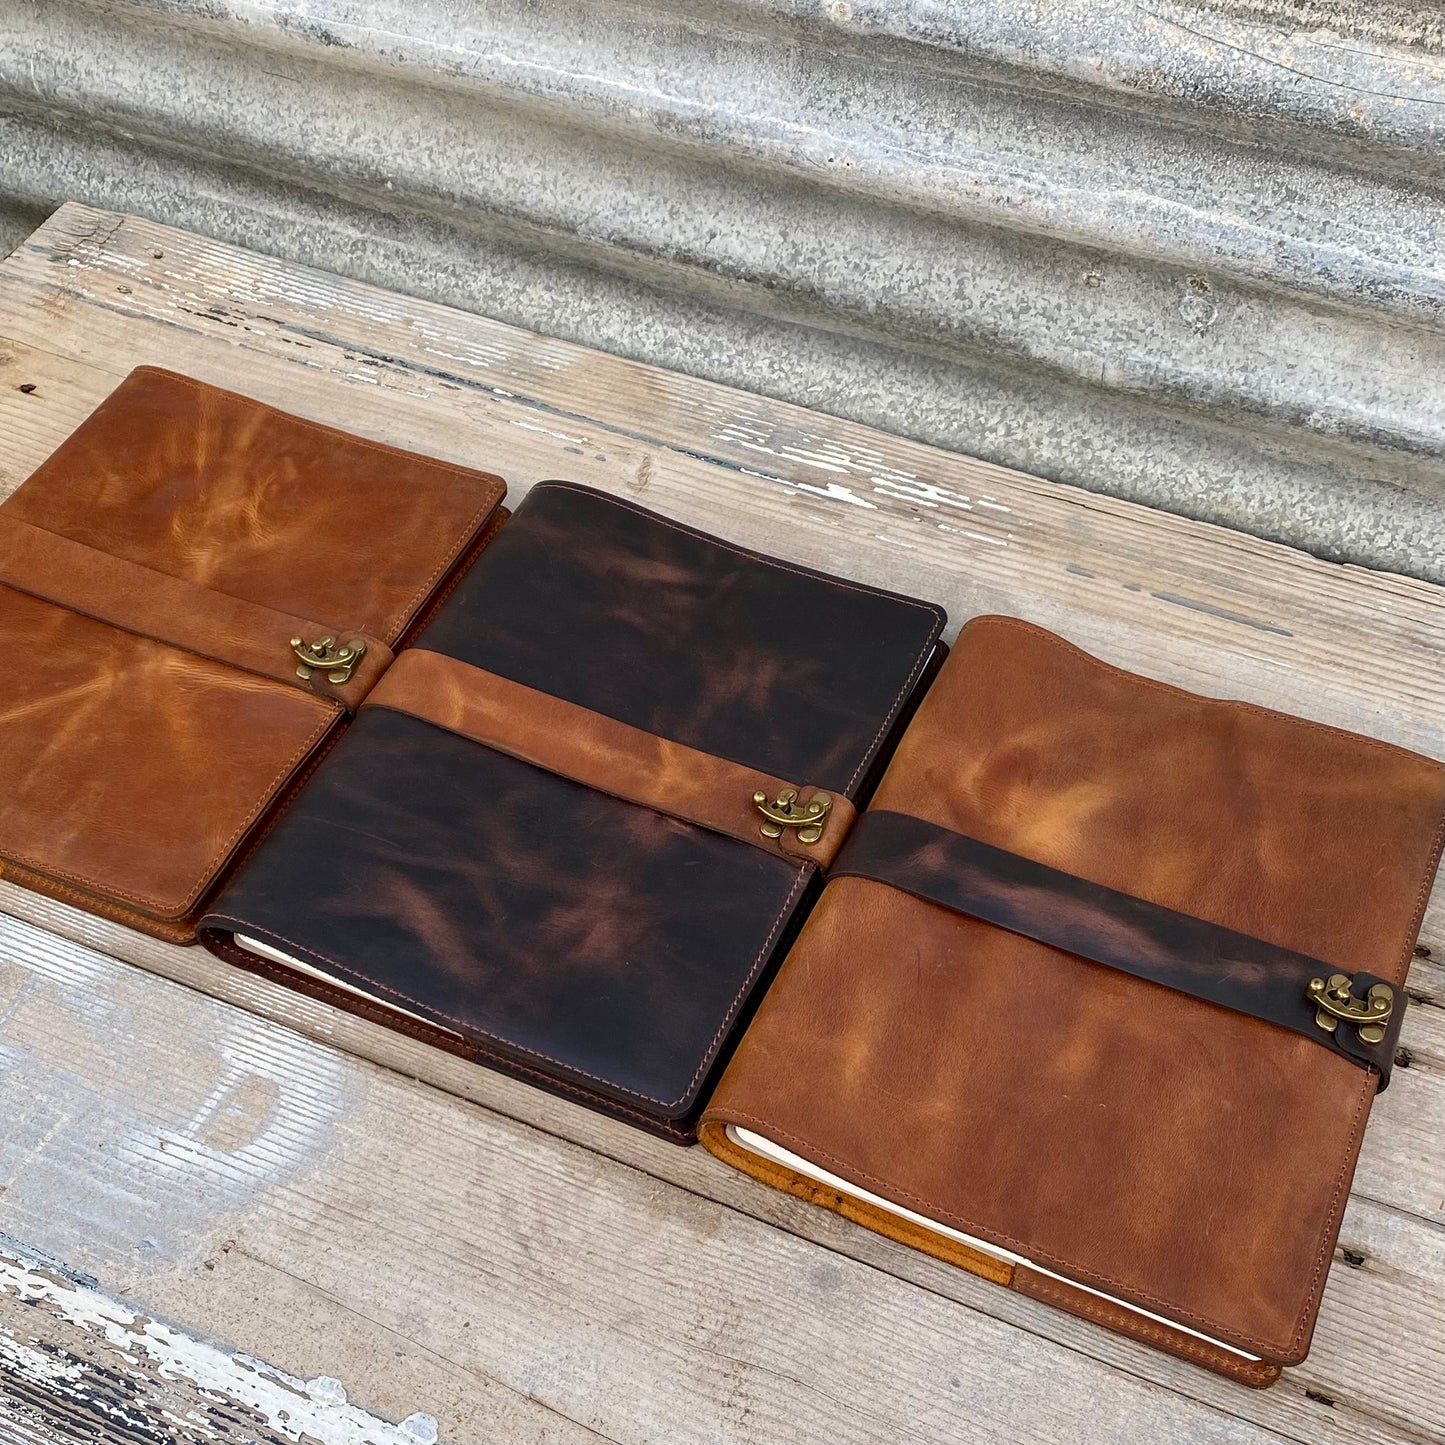 A4 & A5 Leather Art Book / Journal Cover $140-$240